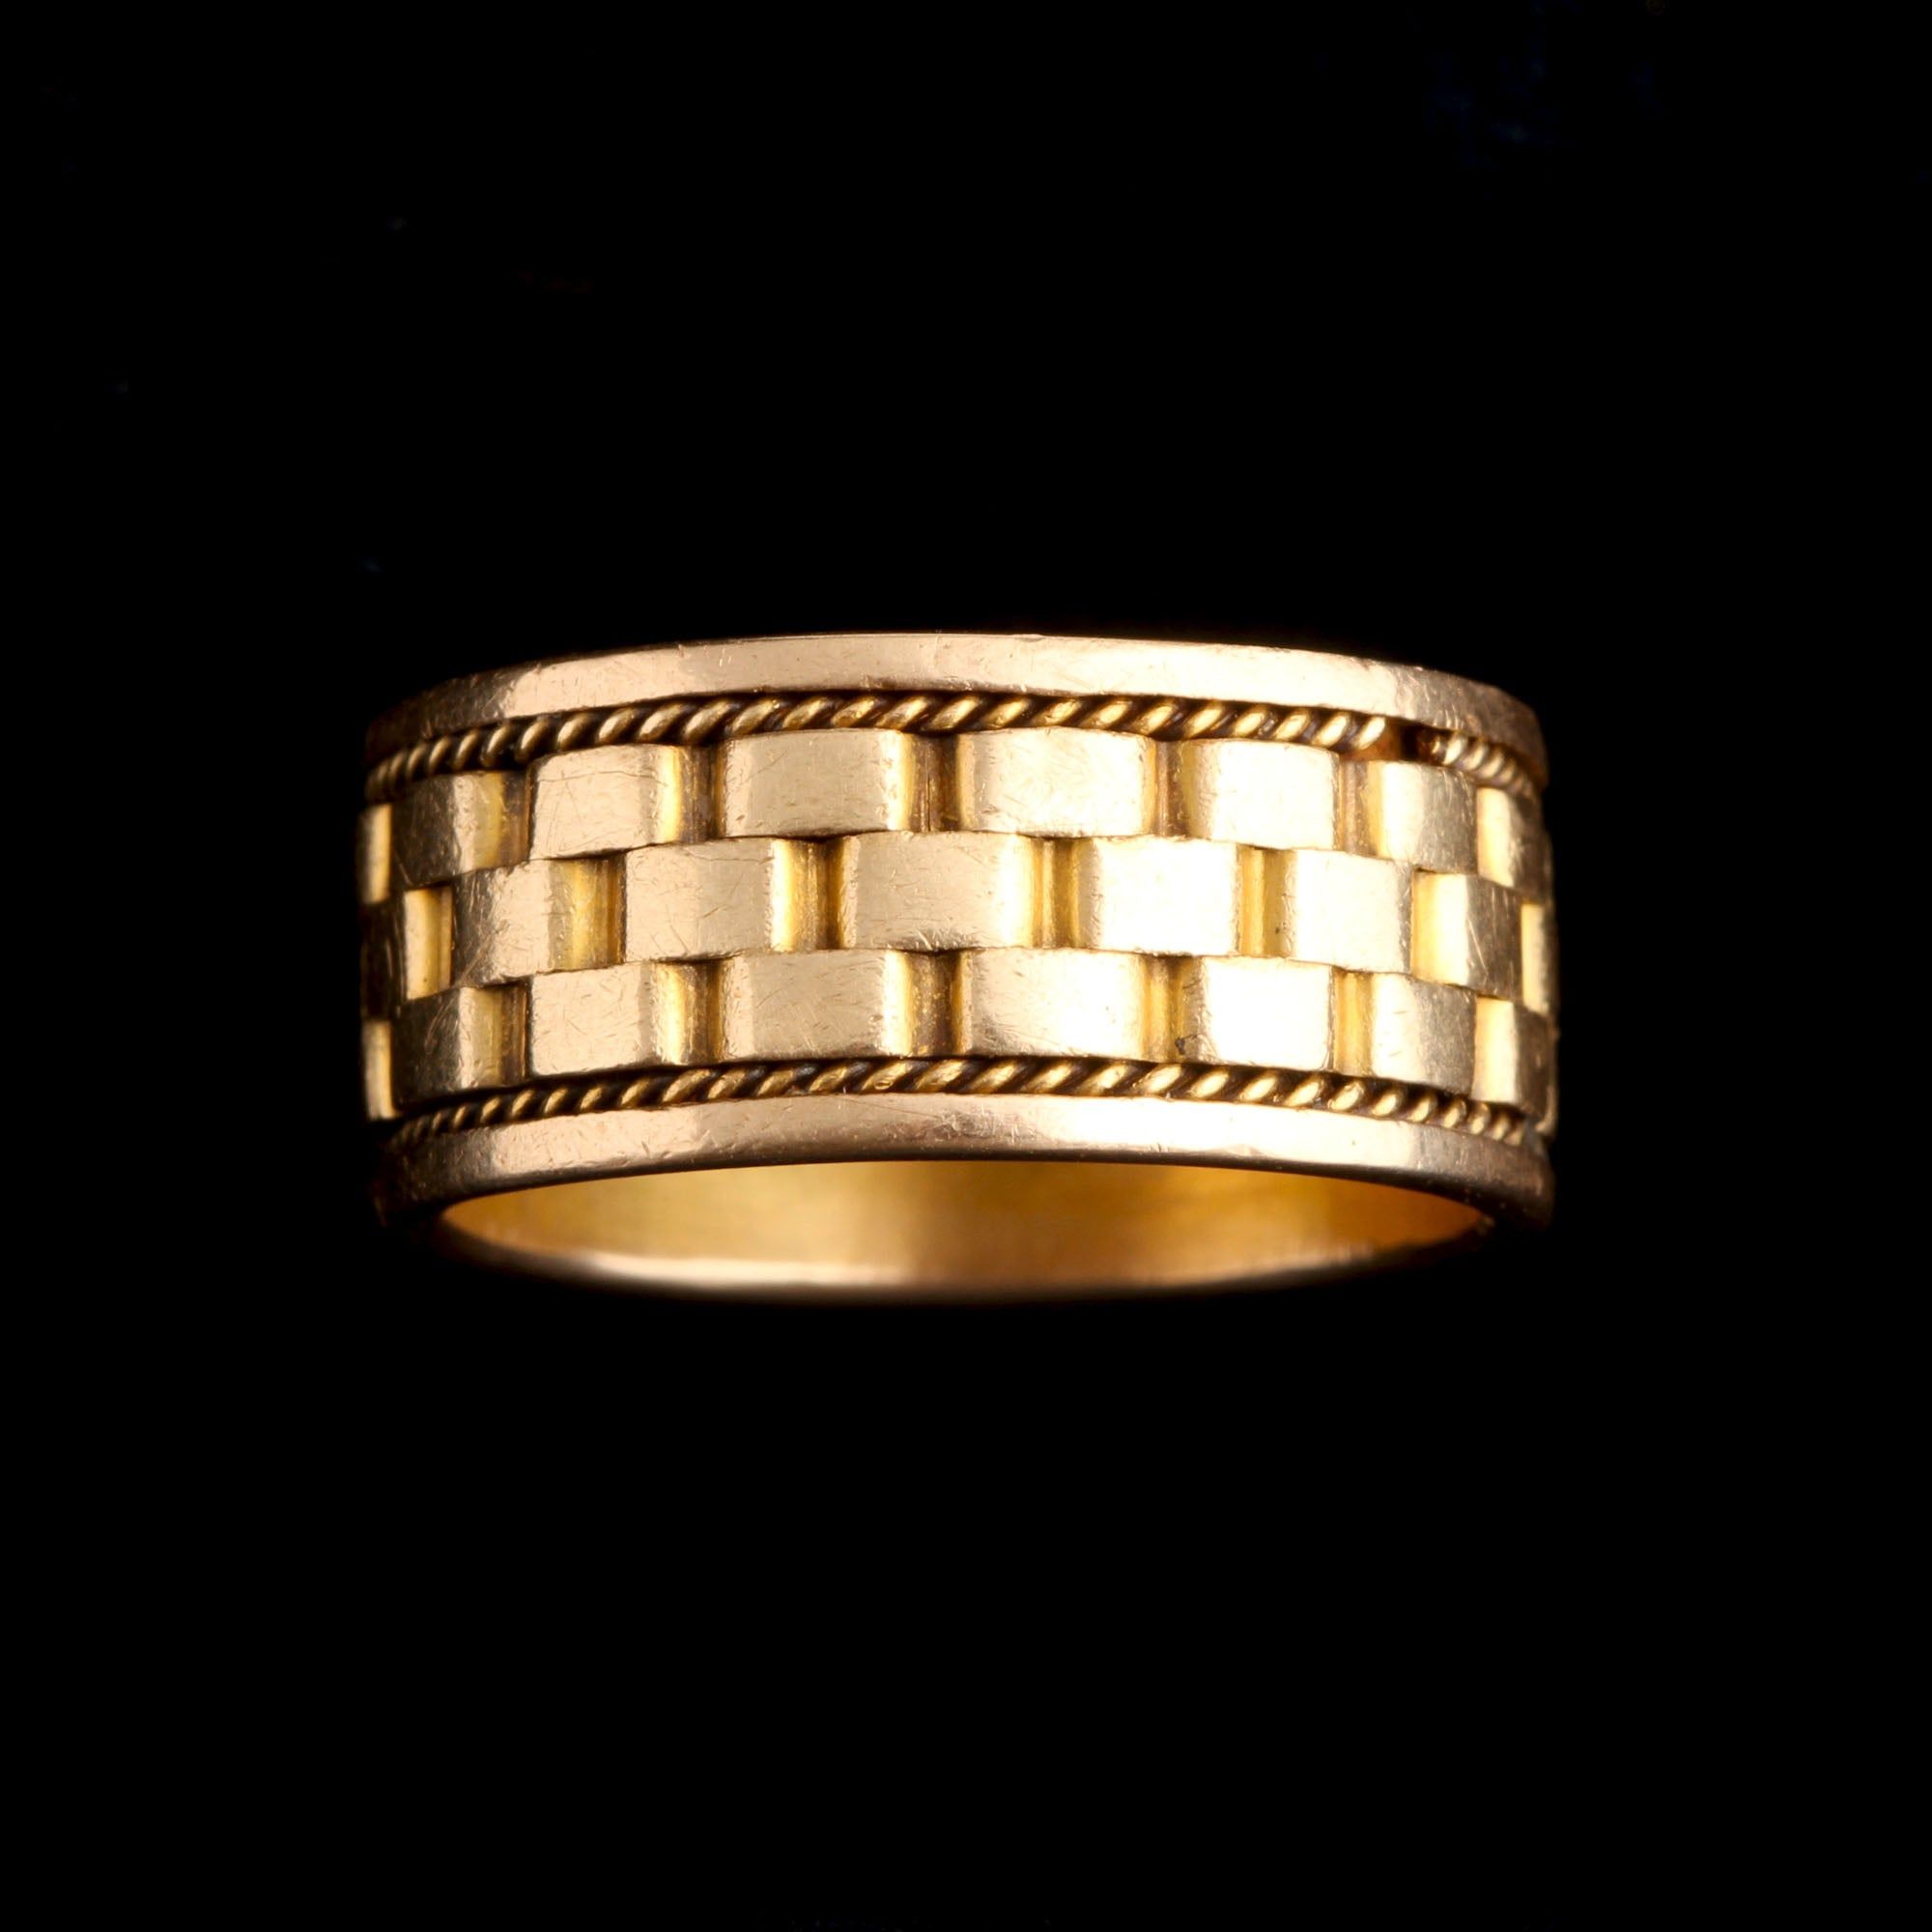 Late Victorian Checkerboard Patterned Heavy Gold Band